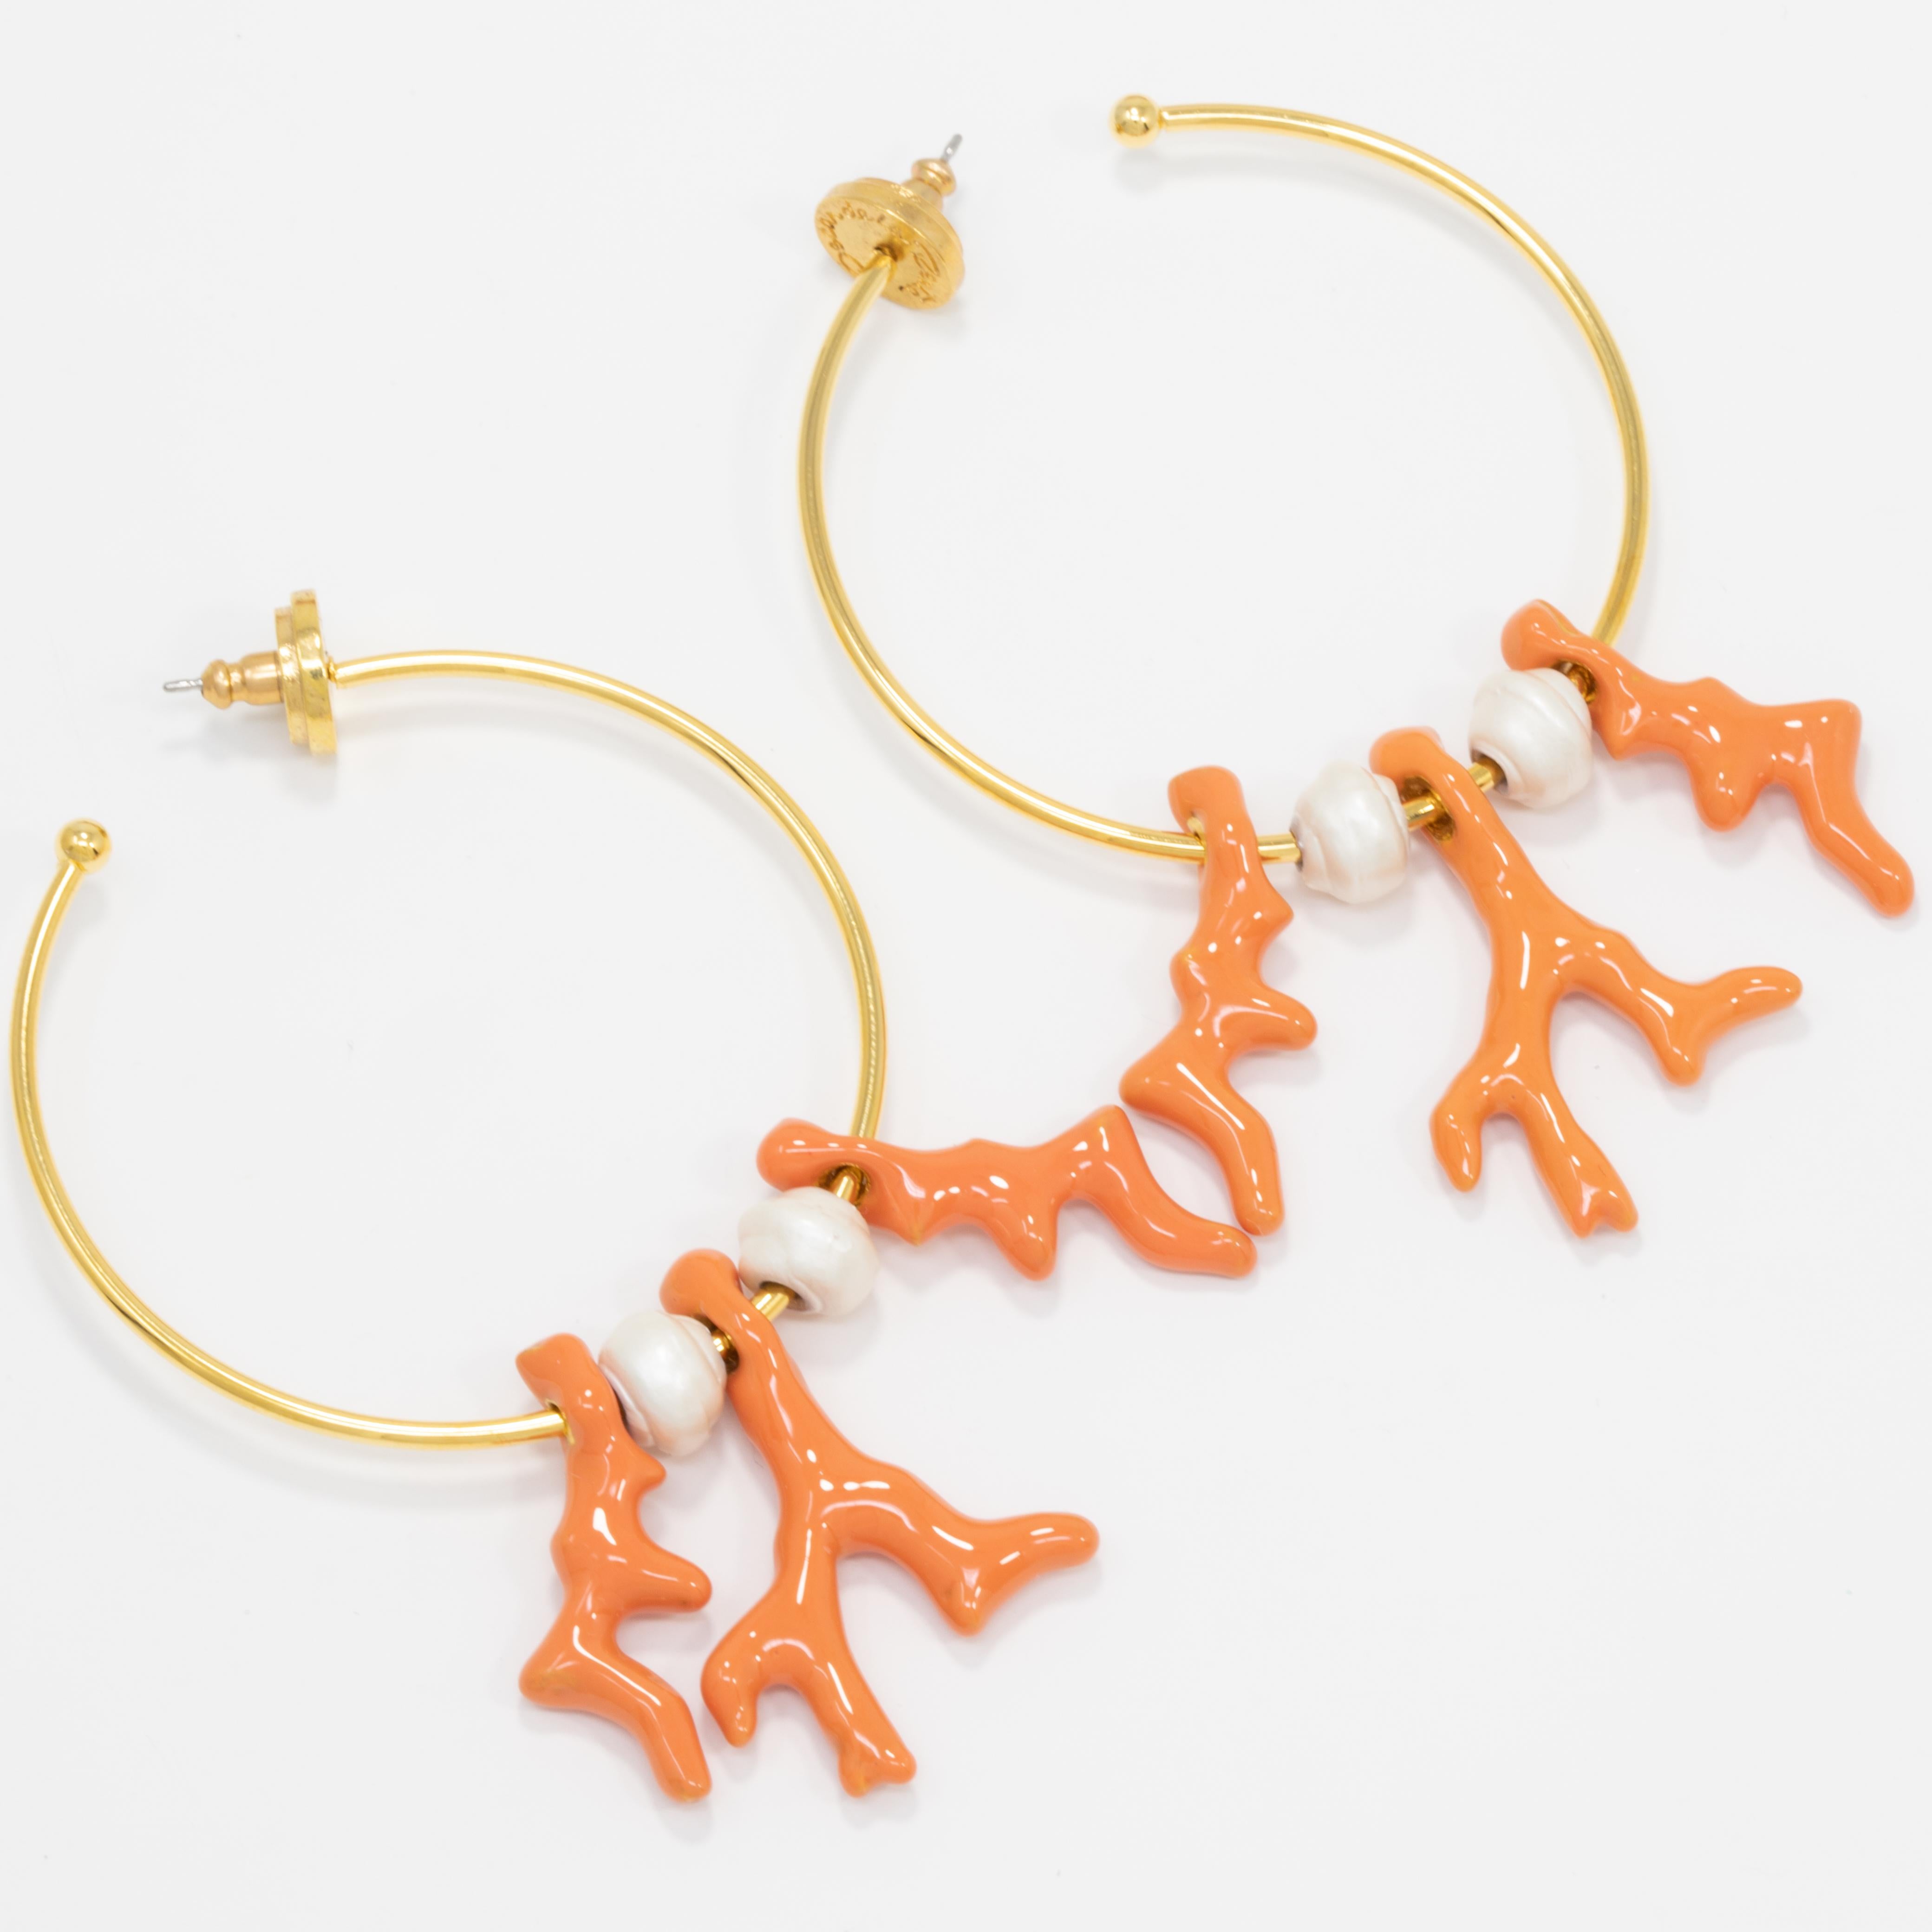 A pair of hoop earrings by Oscar de la Renta, accented with dangling enameled coral and faux pearls. Add a golden glow to your outfit!

Gold plated.

Hallmarks: Oscar de la Renta, Made in USA